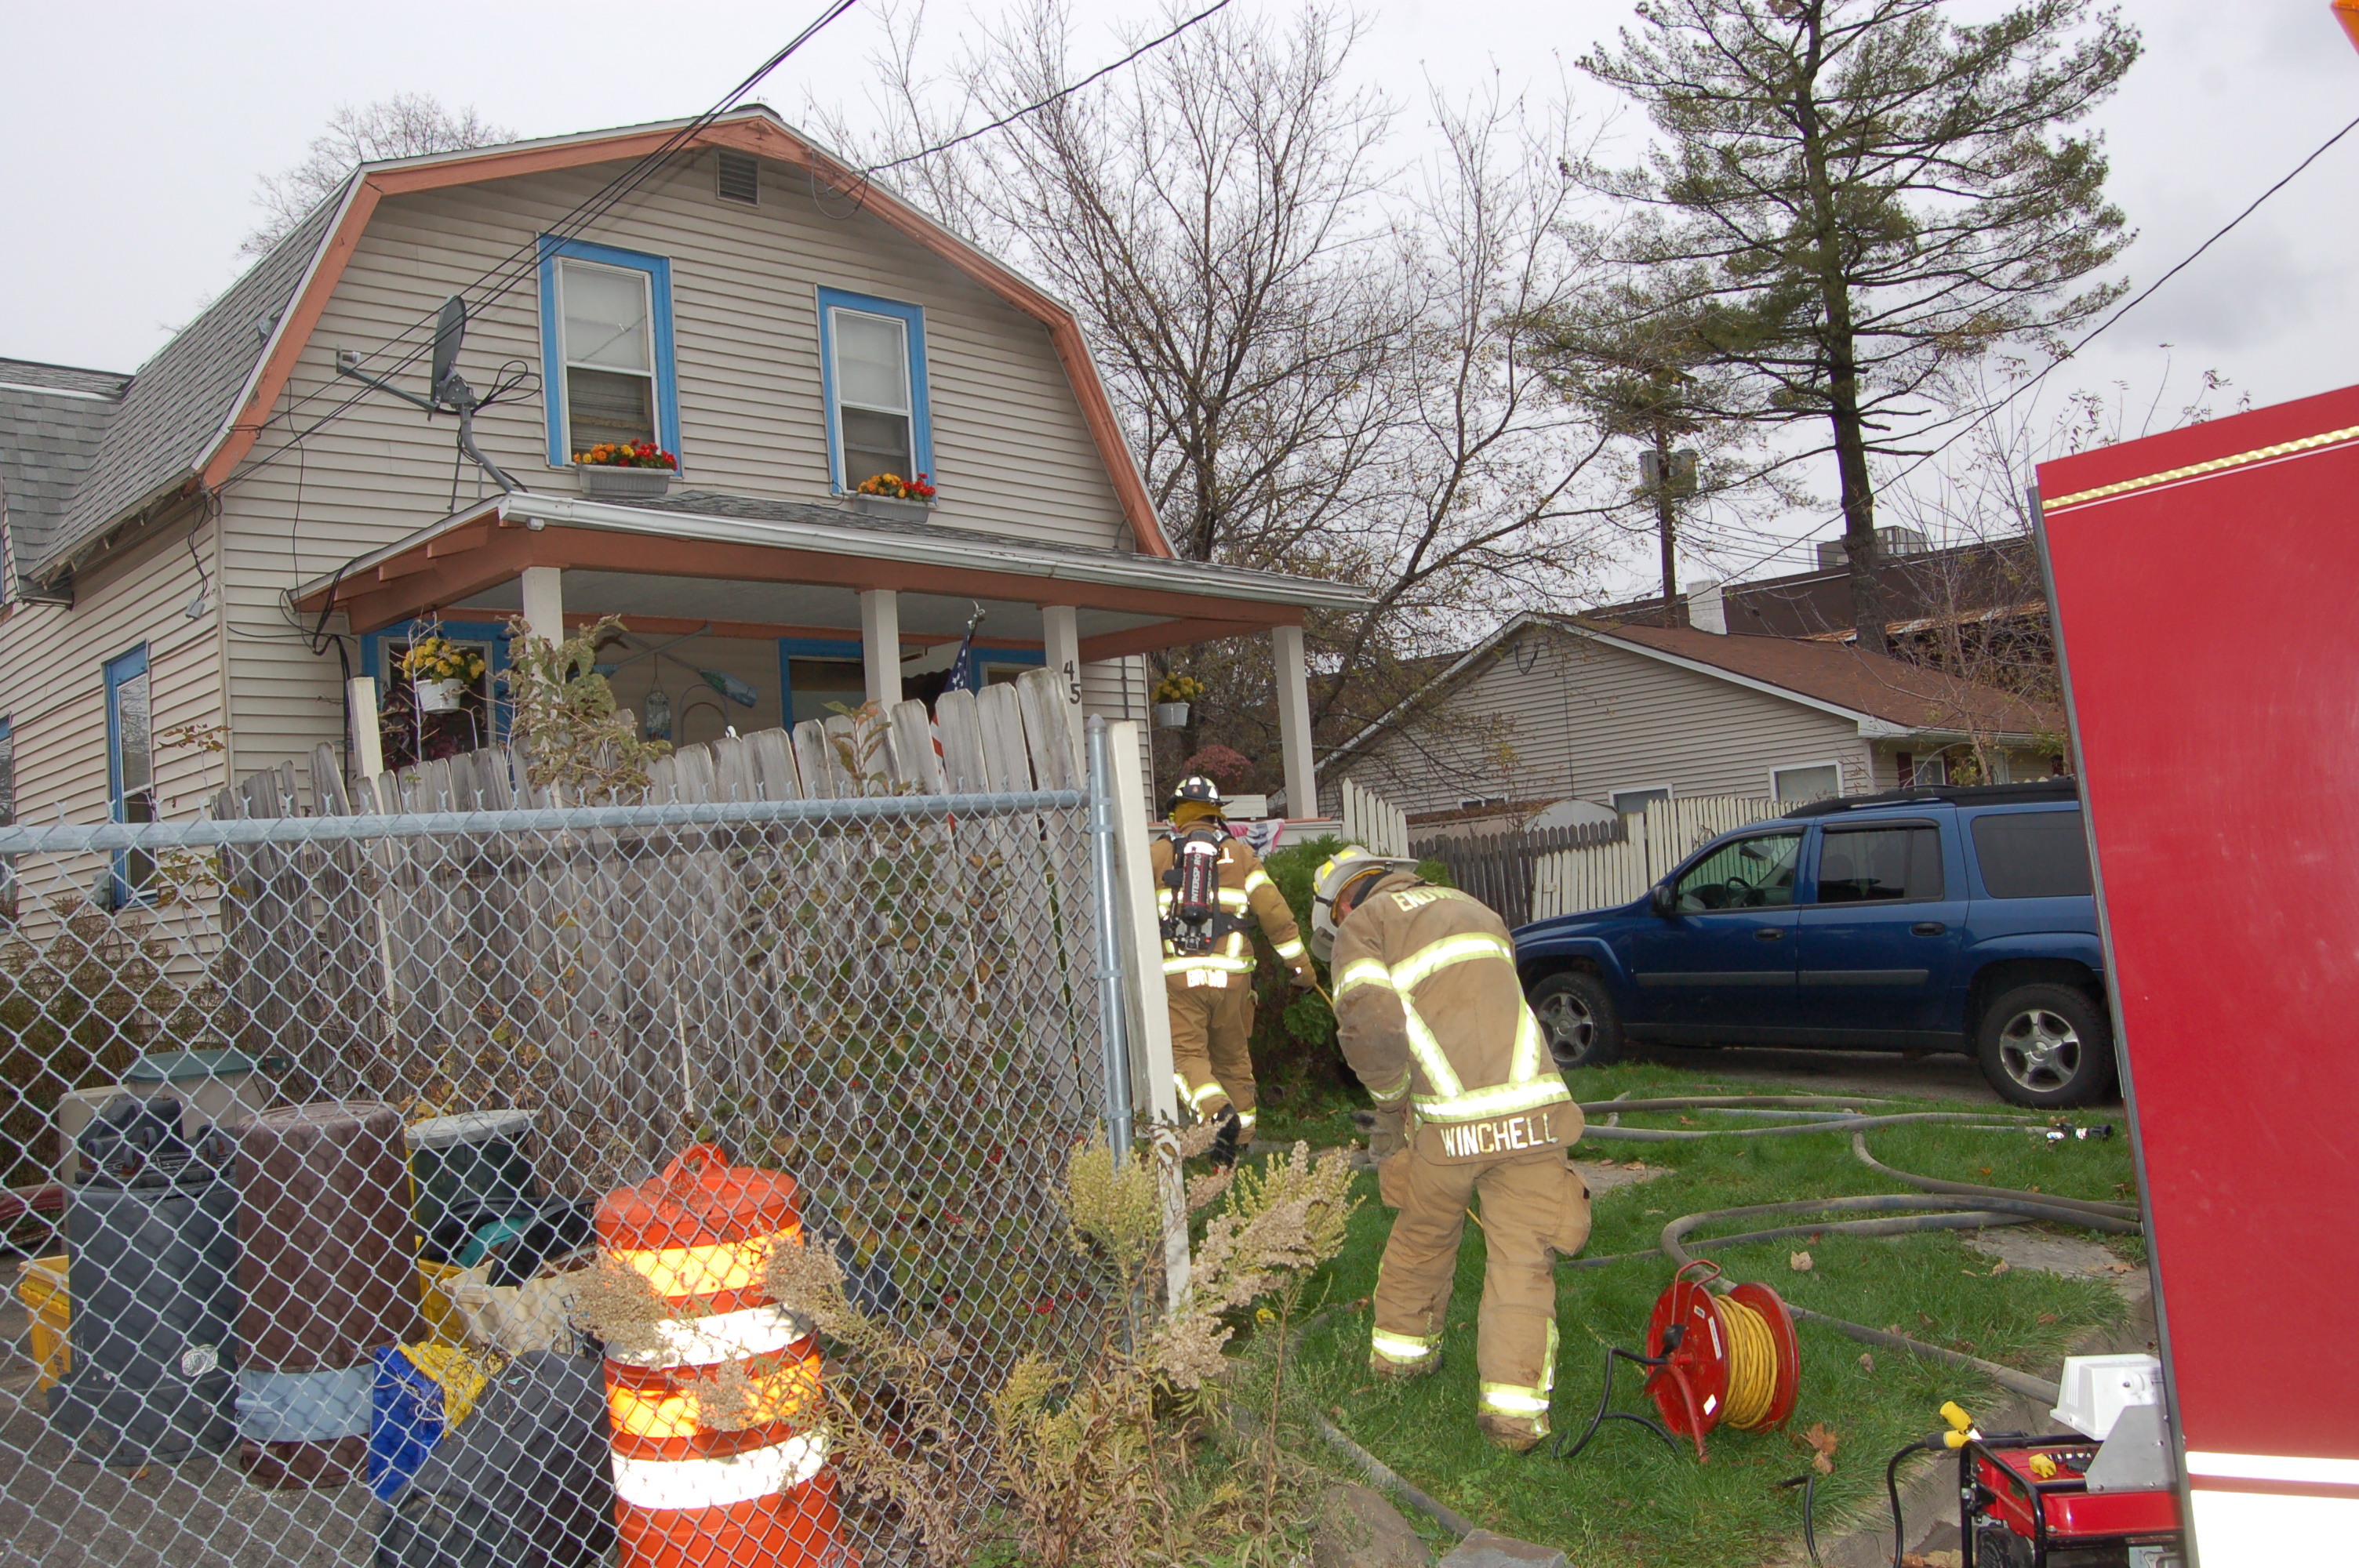 11-29-11  Response - Stove Fire 45 N Brookside